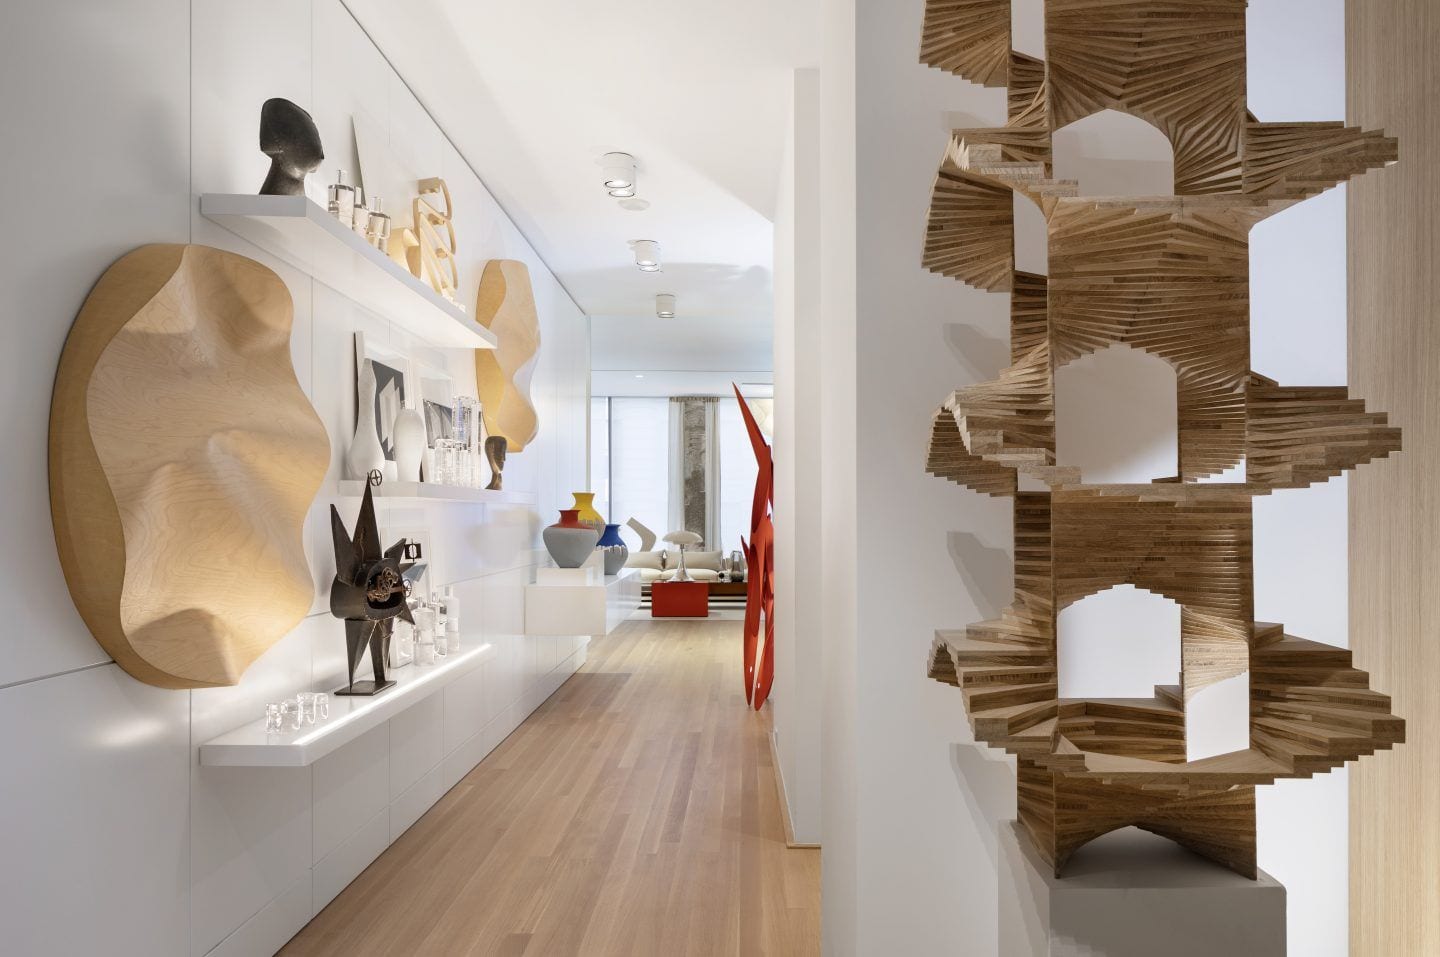 A hallway filled with sculptures inside architect Lee Mindel's luxury New York City apartment. 